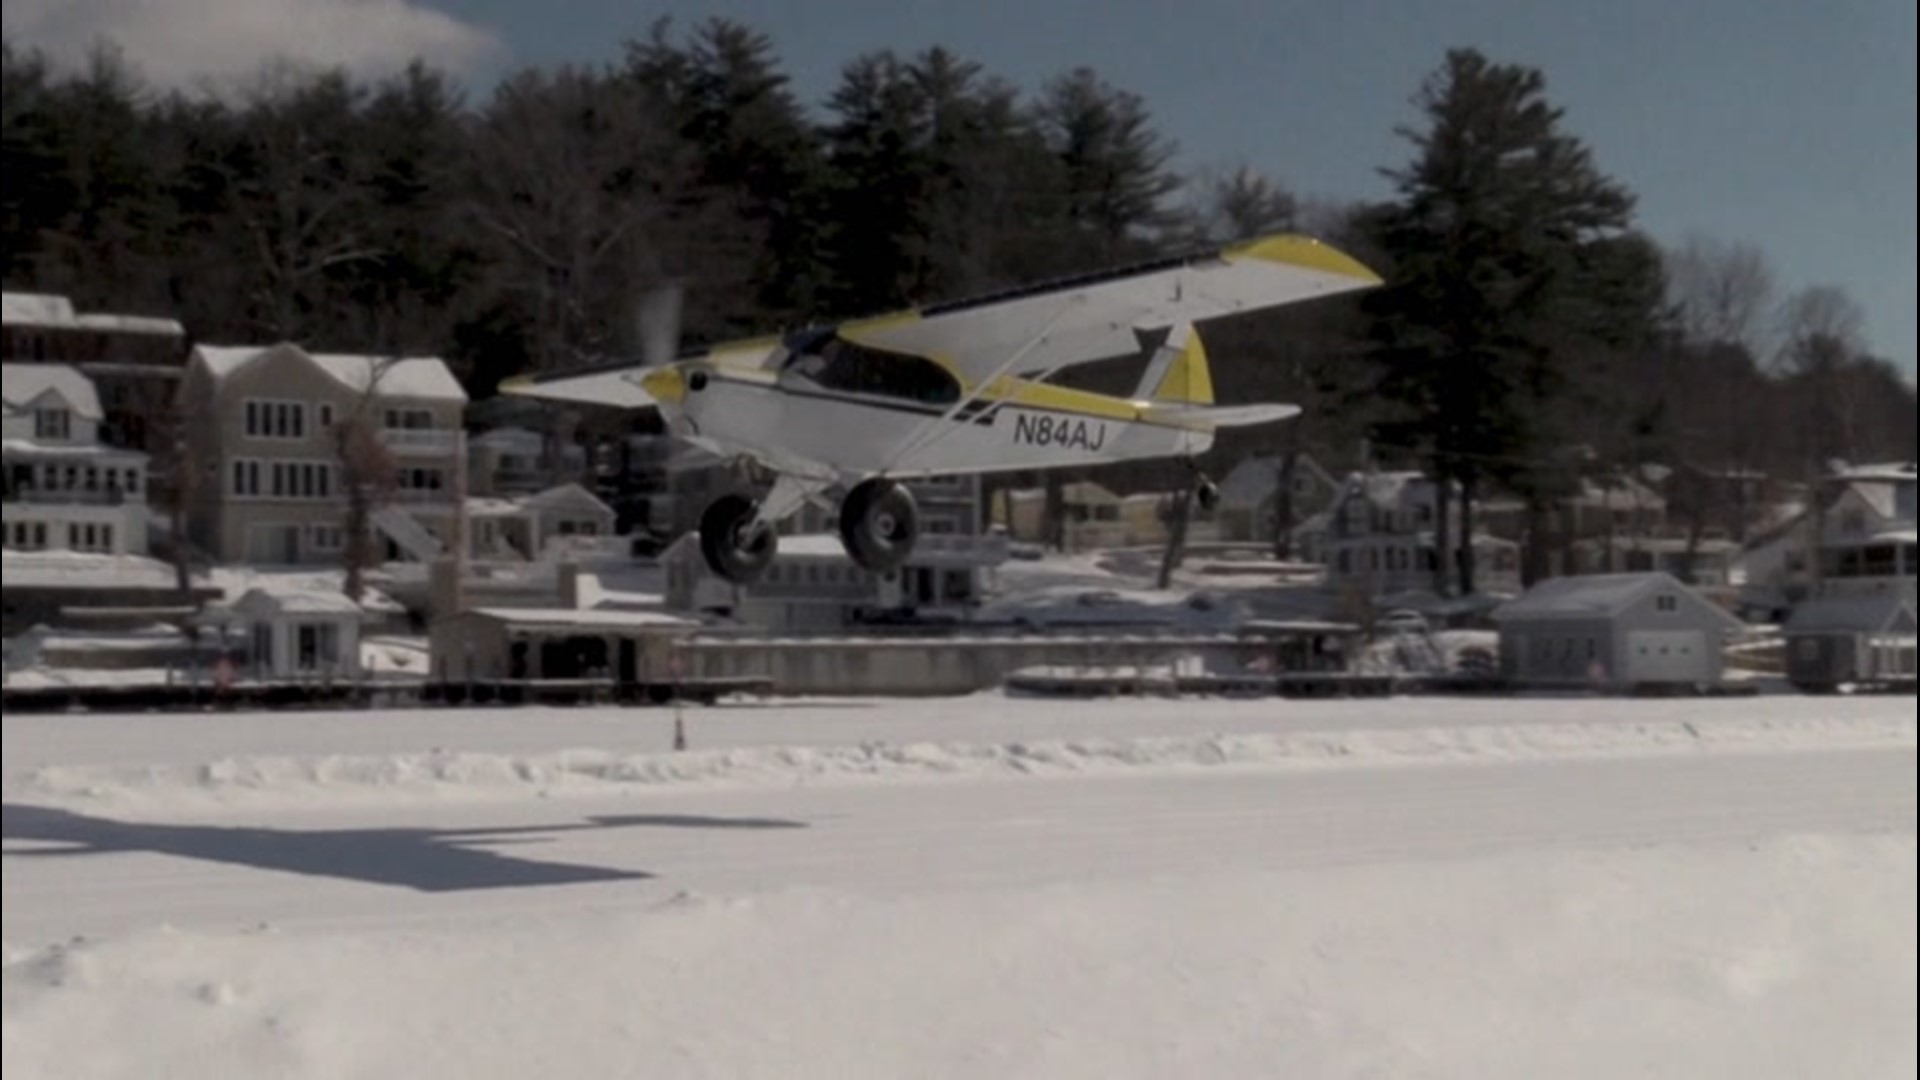 Each winter, once Lake Winnipesaukee in New Hampshire freezes to a depth of at least a foot, it becomes a runway for planes. In 2020, a warm winter prevented the runway from opening, but they're back in business this year.